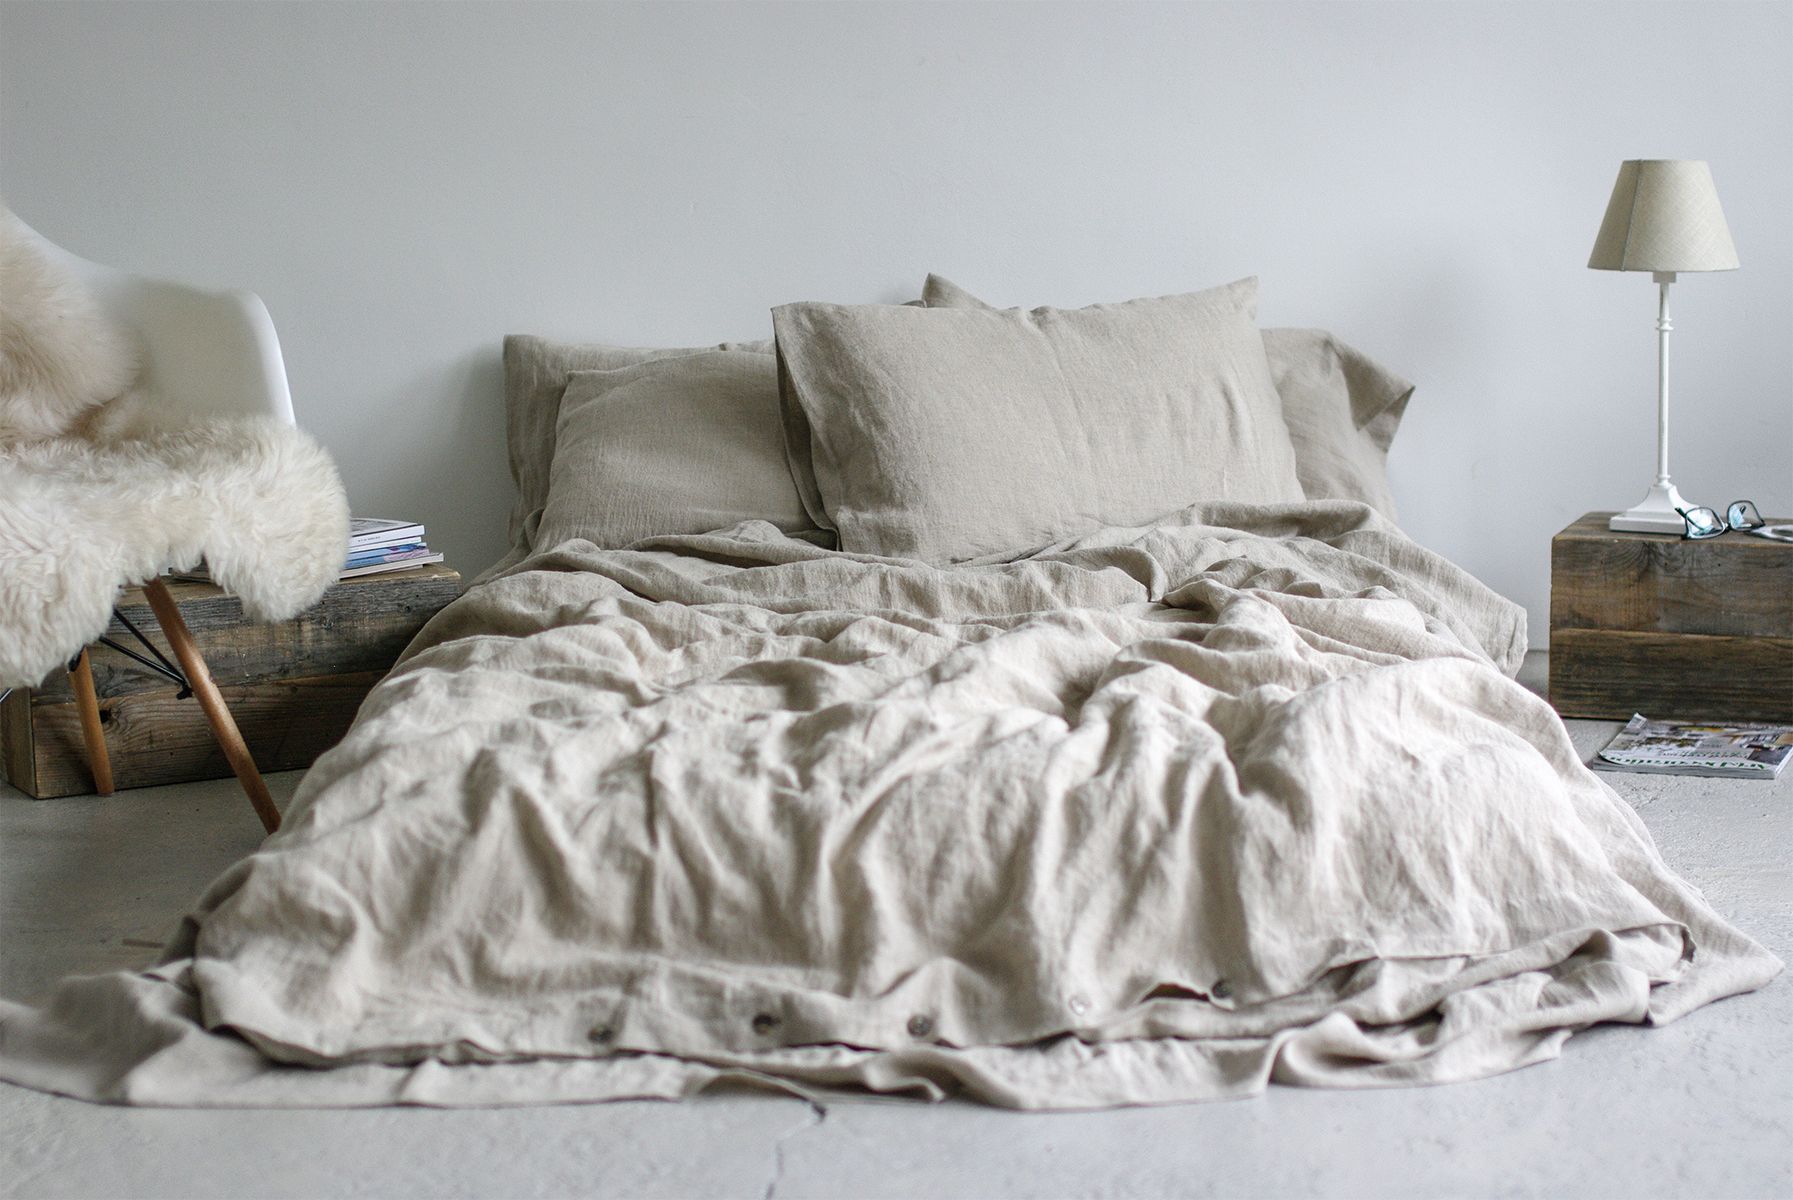 Want to Upgrade Your Sleep Experience? How Does Soft Linen Bedding Compare?